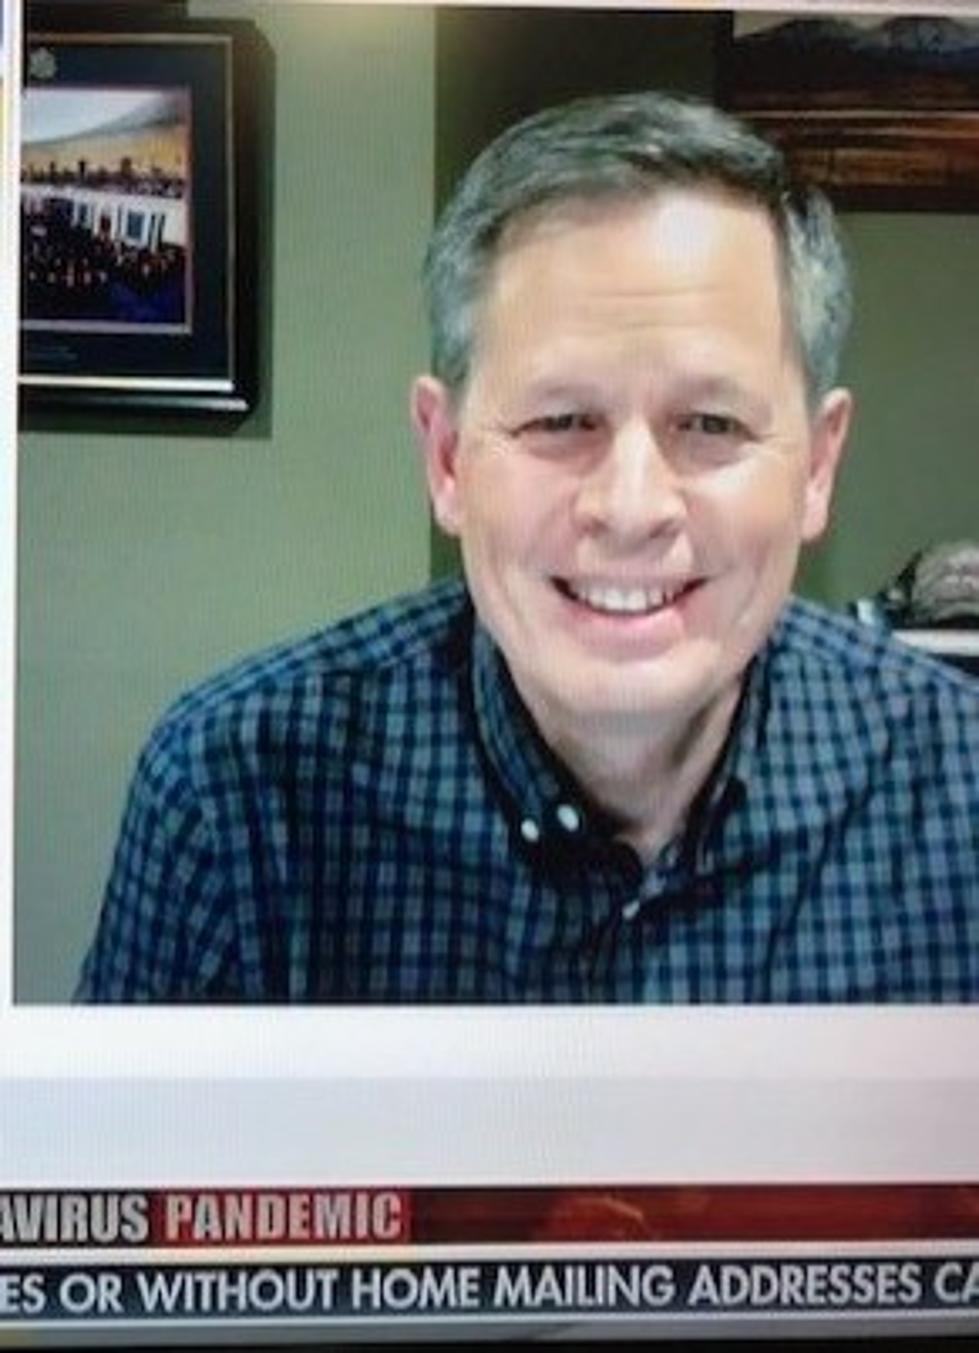 Steve Daines on Fox News about New COVID 19 Medications